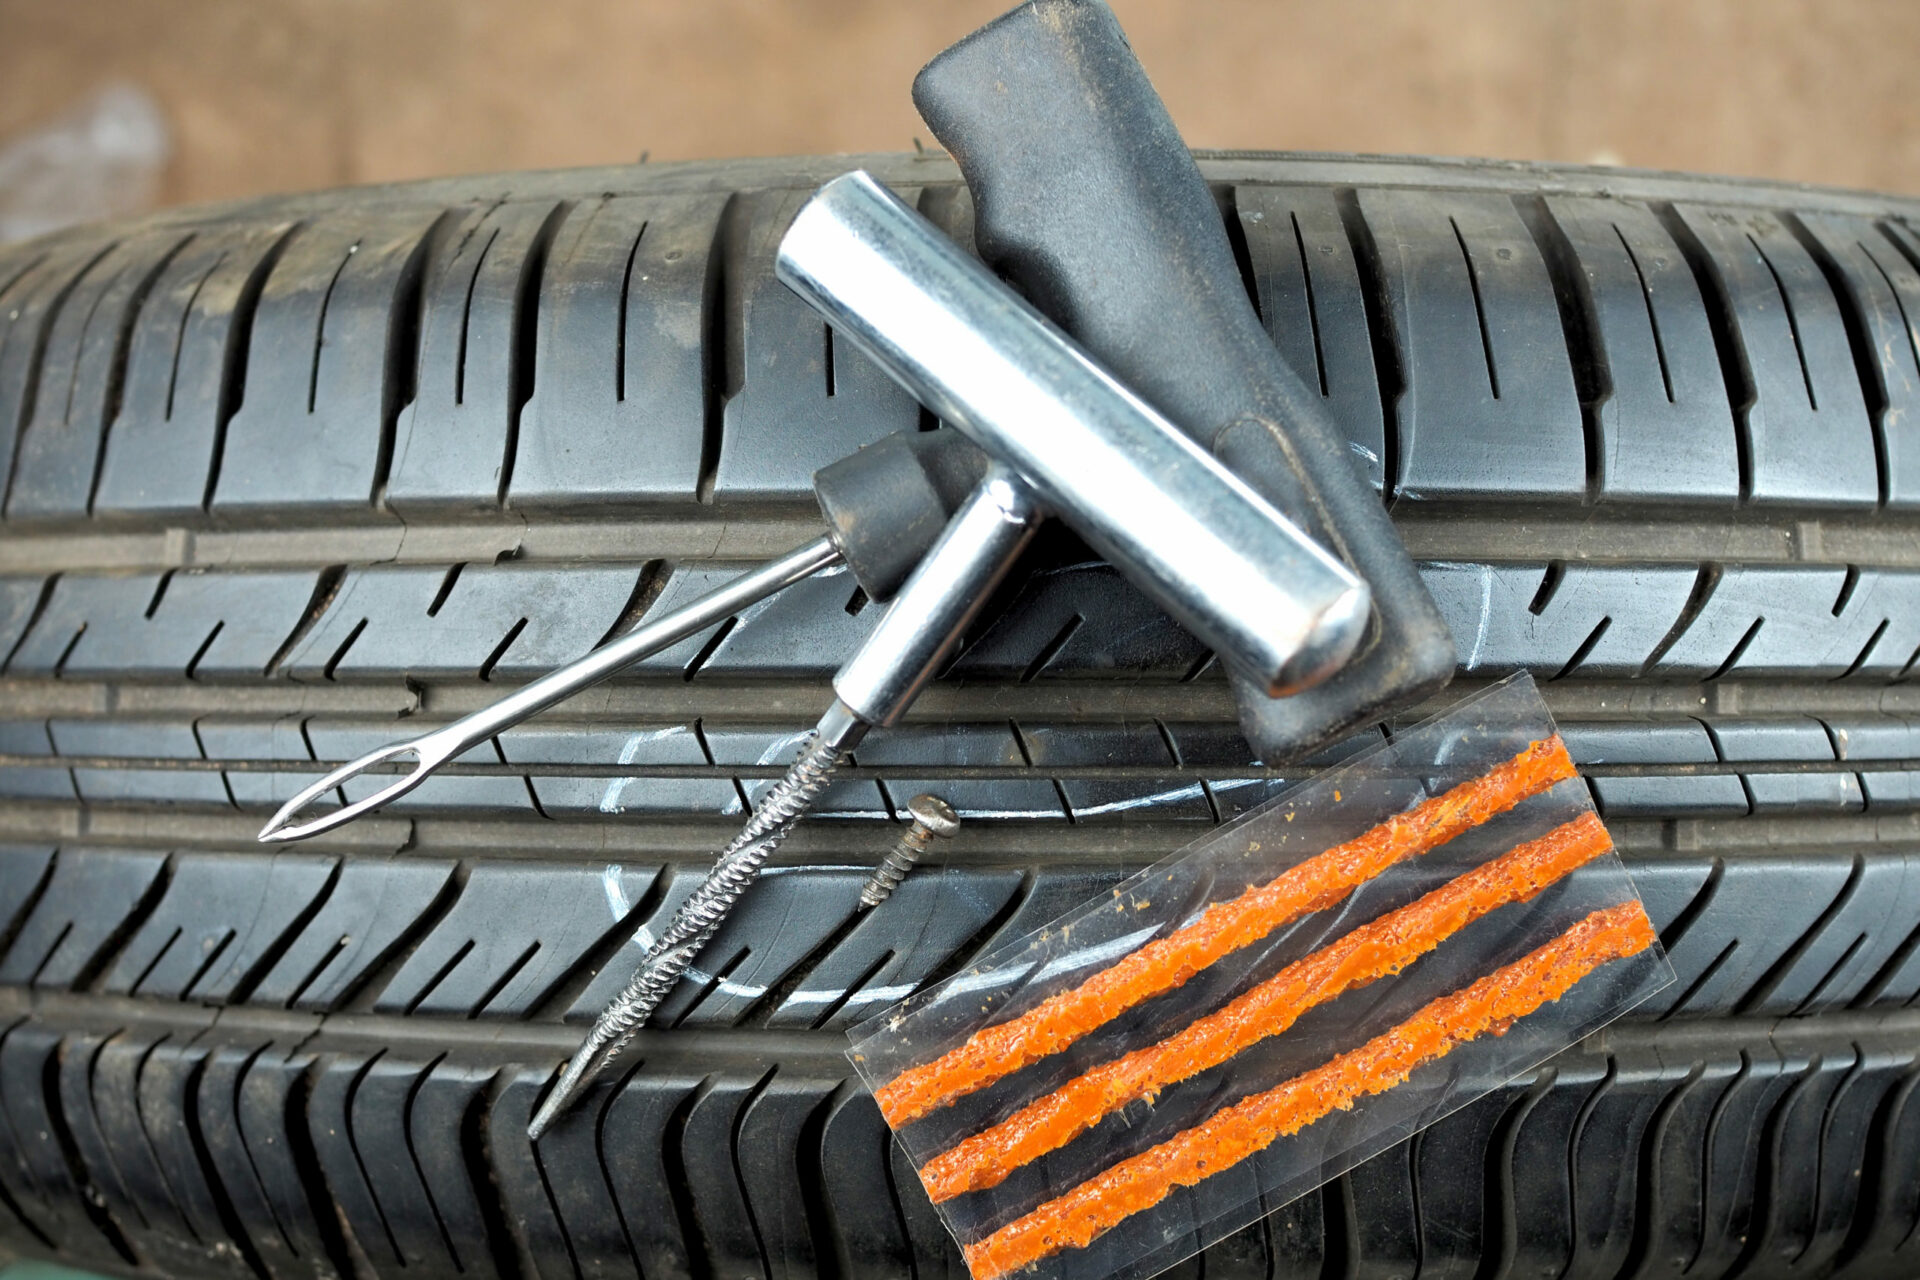 Why Do I Have a Tyre Repair Kit Instead of a Spare Wheel?